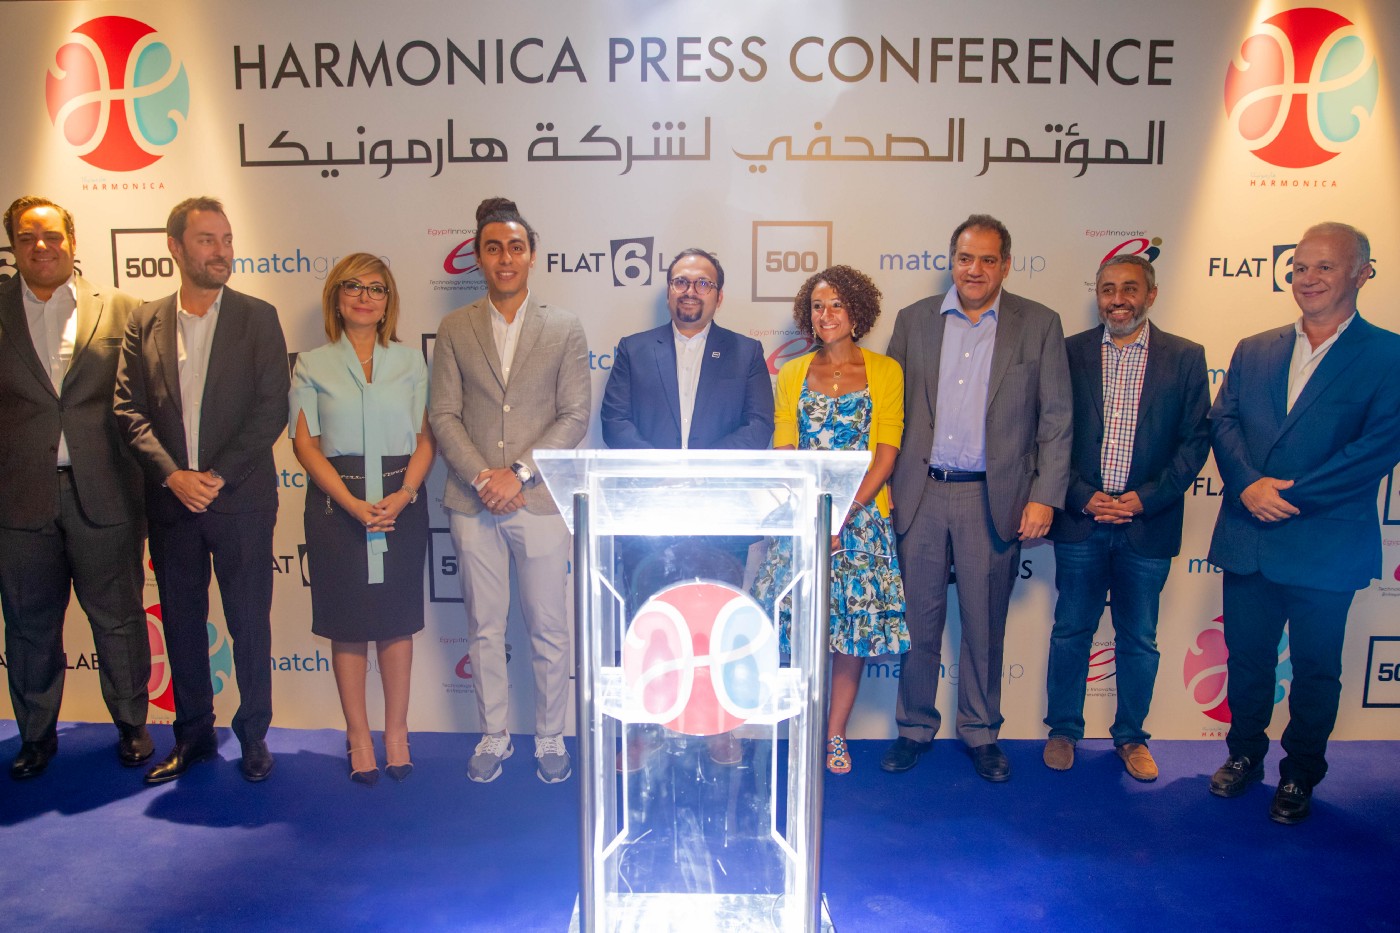 Official Press Conference: Match Group Acquires Harmonica as Flat6Labs Fully Exits